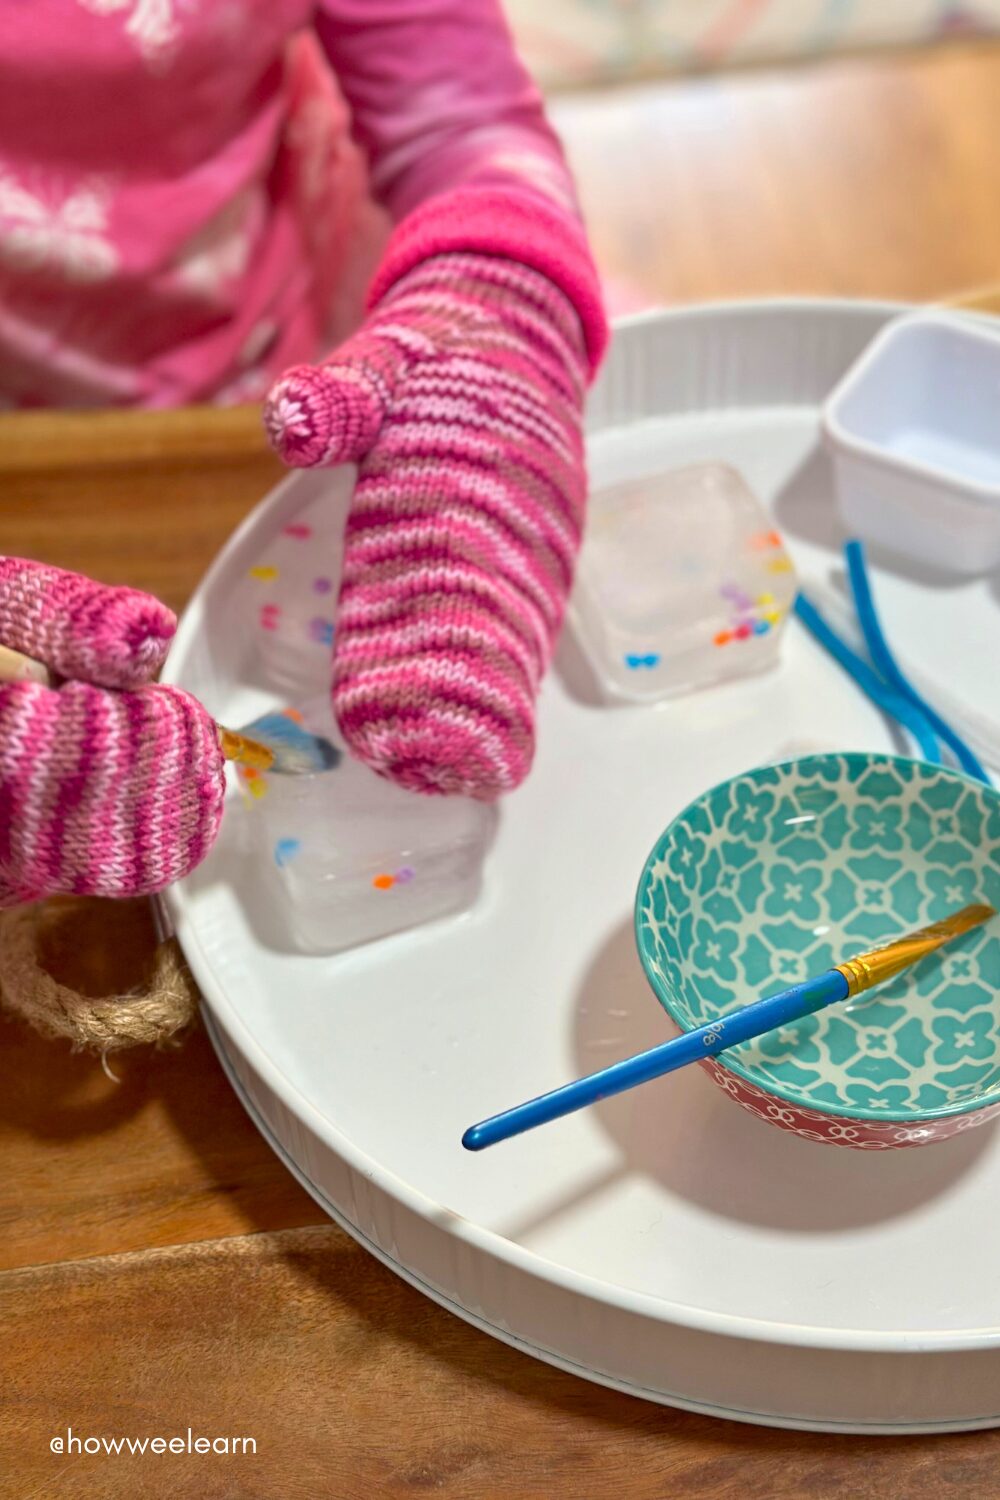 Free the beads sensory activity for preschoolers